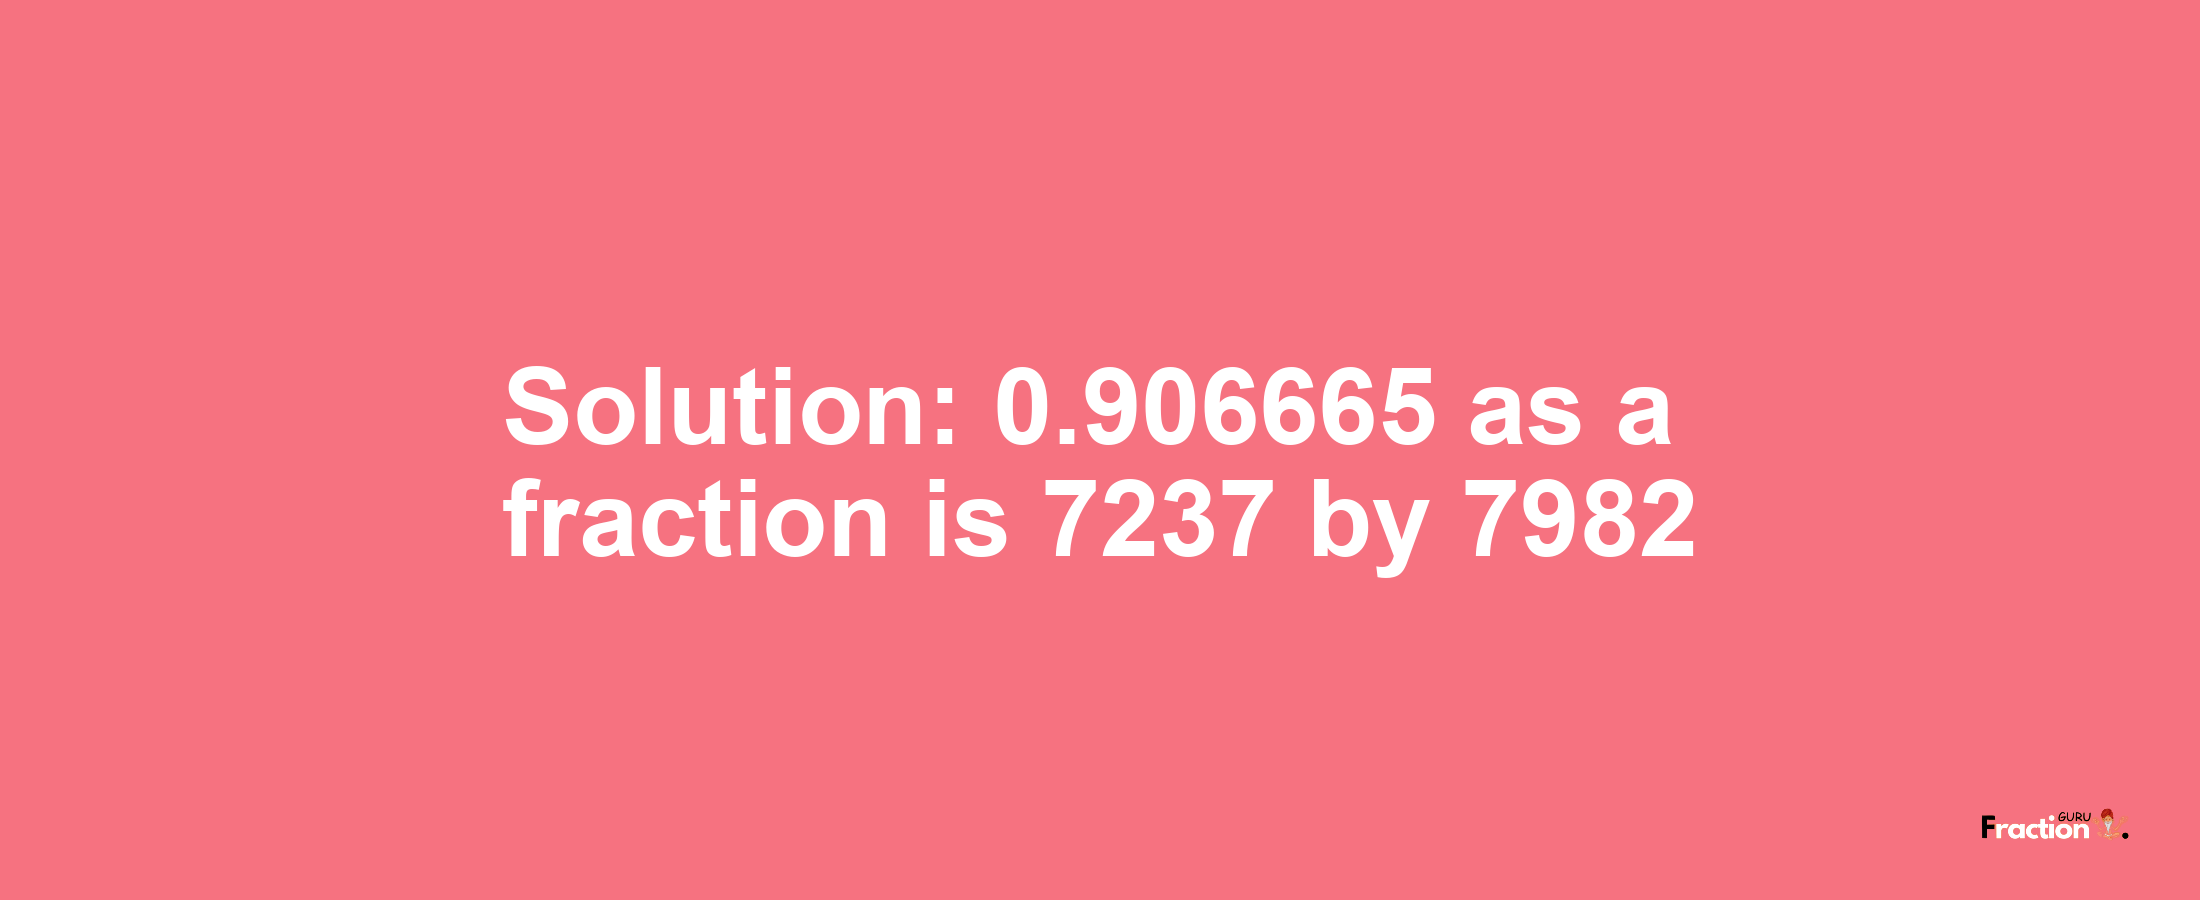 Solution:0.906665 as a fraction is 7237/7982